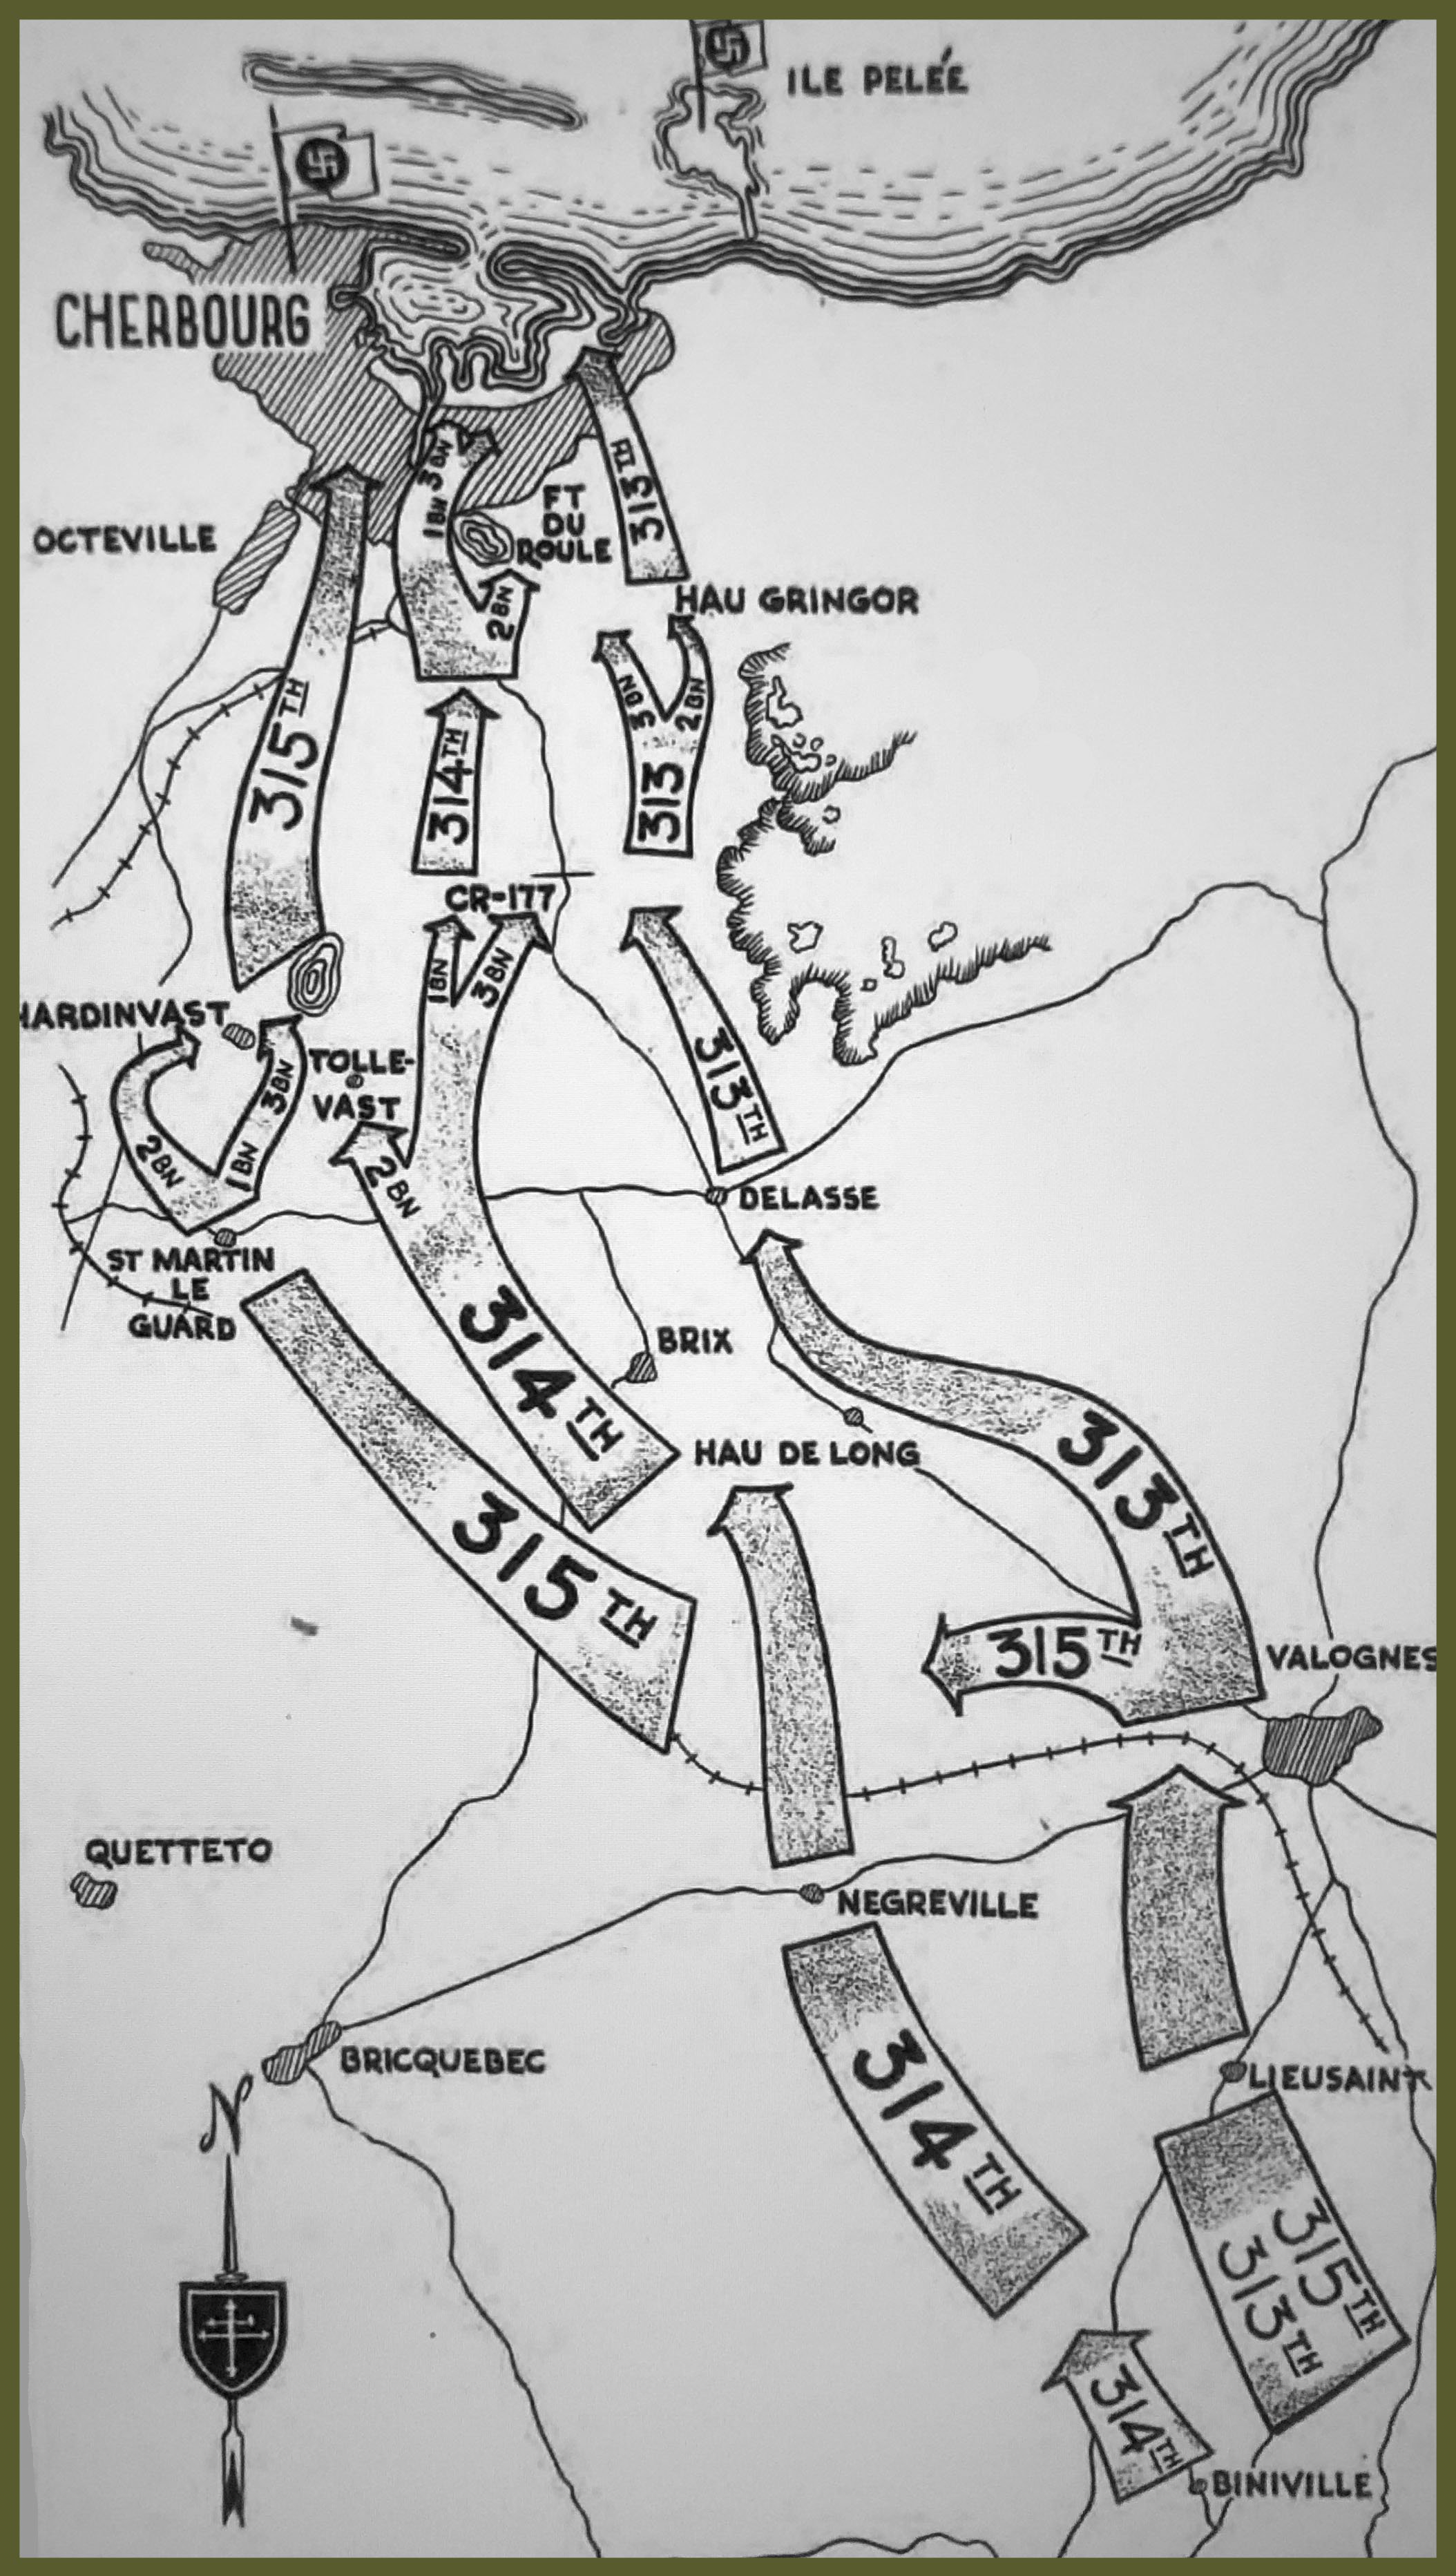 79th infantry division route to Cherbourg 